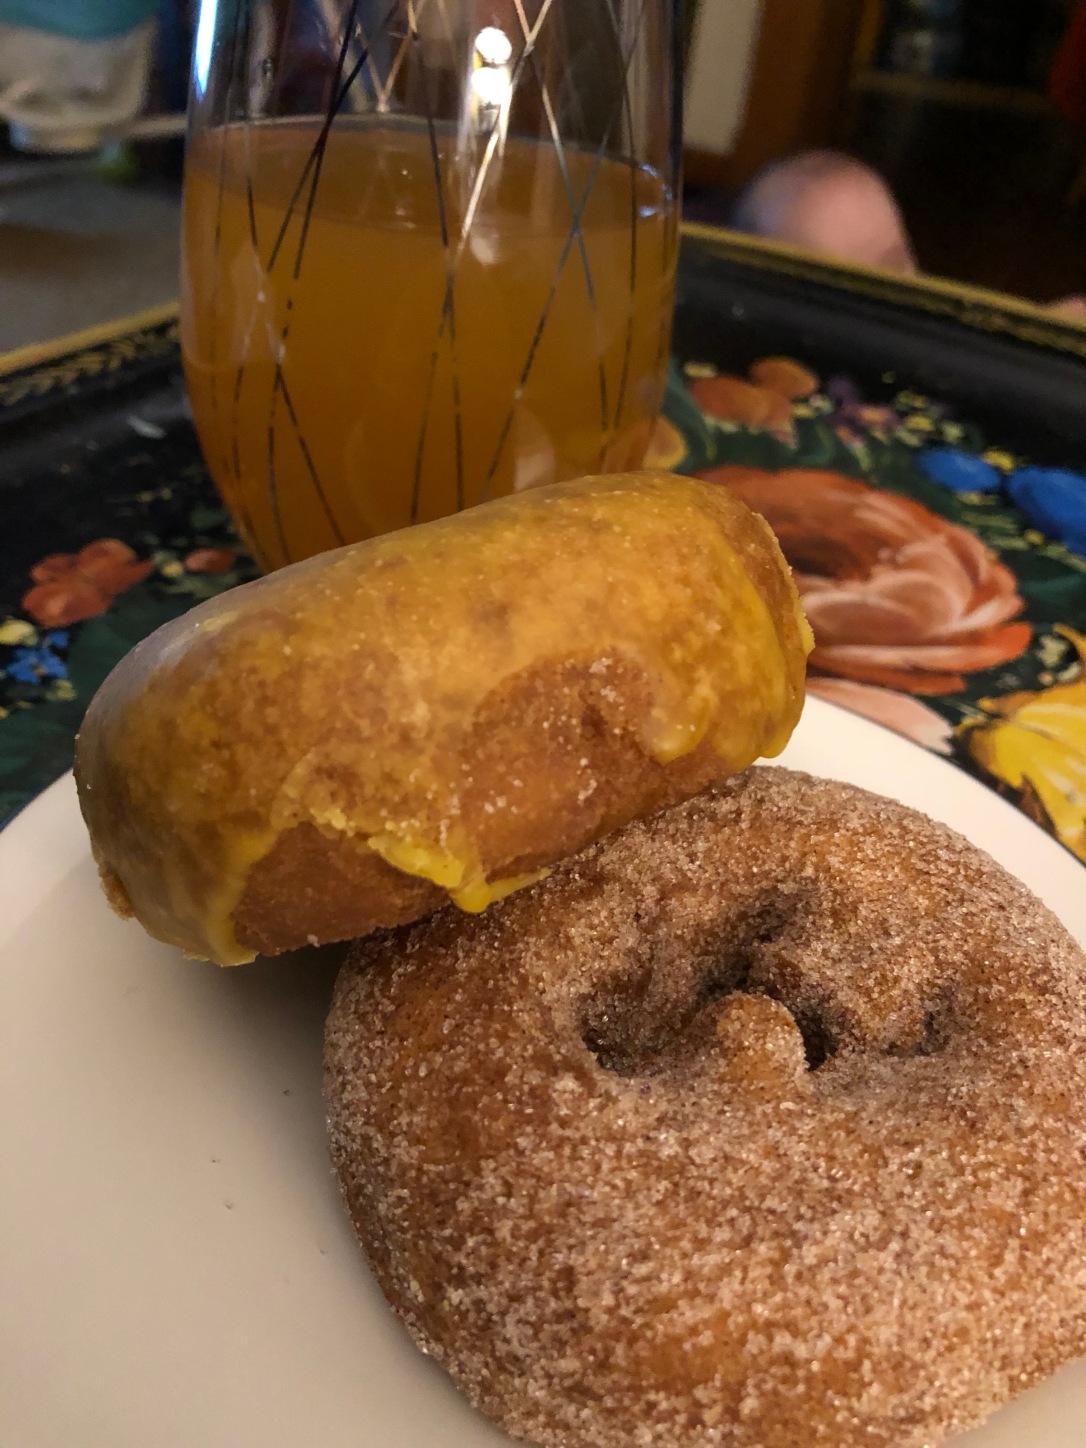 Apple Cider drink and donuts from Fuhrman's